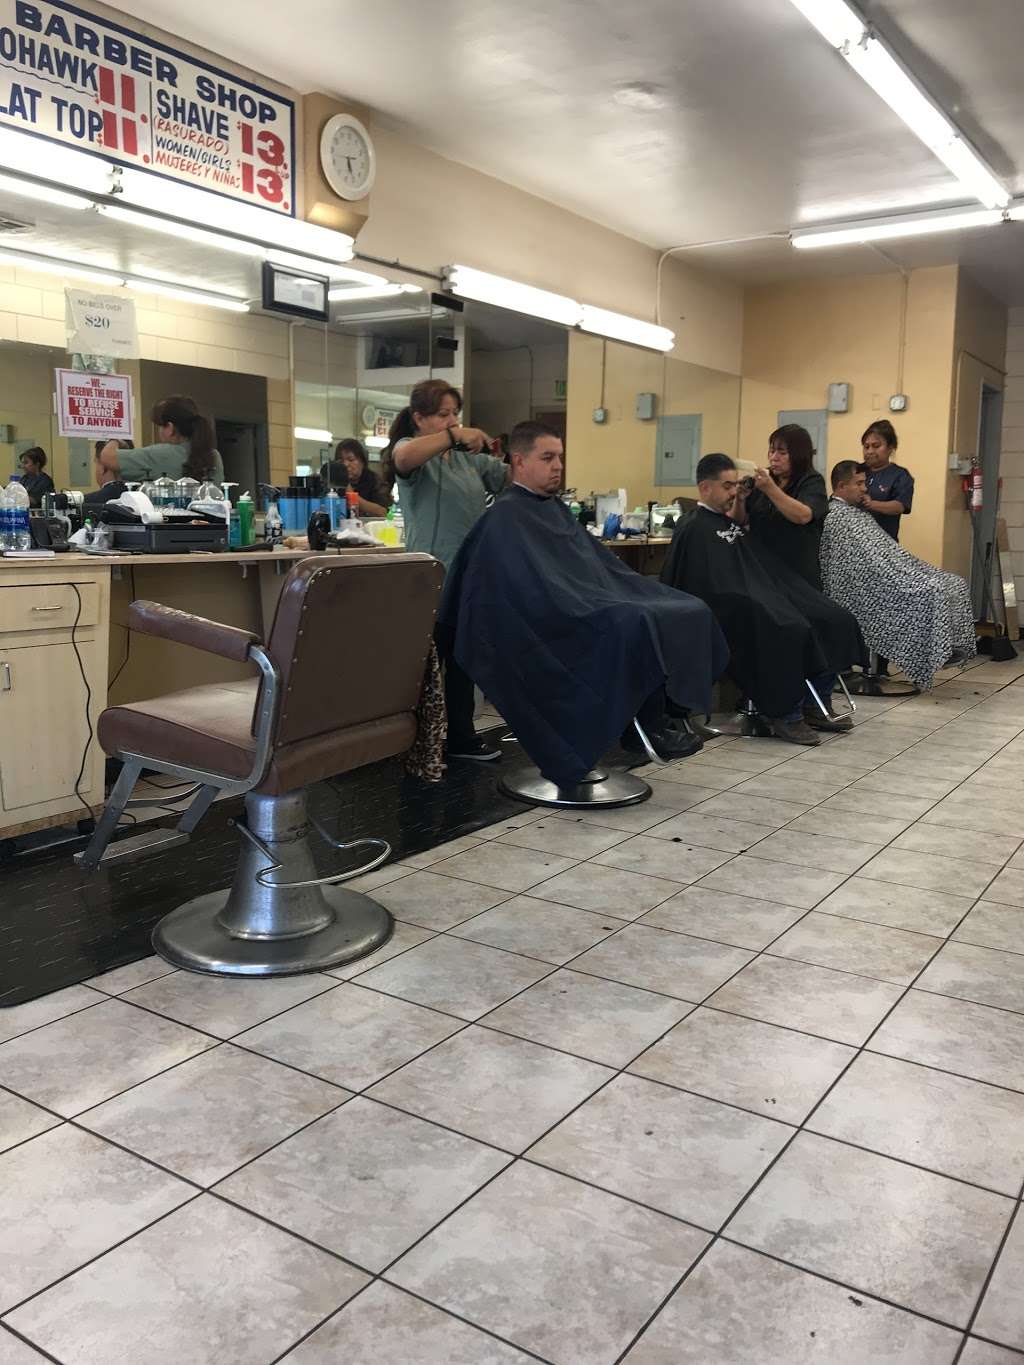 Friends Barber Shop | 657 Giano Ave, City of Industry, CA 91748, USA | Phone: (626) 581-7707